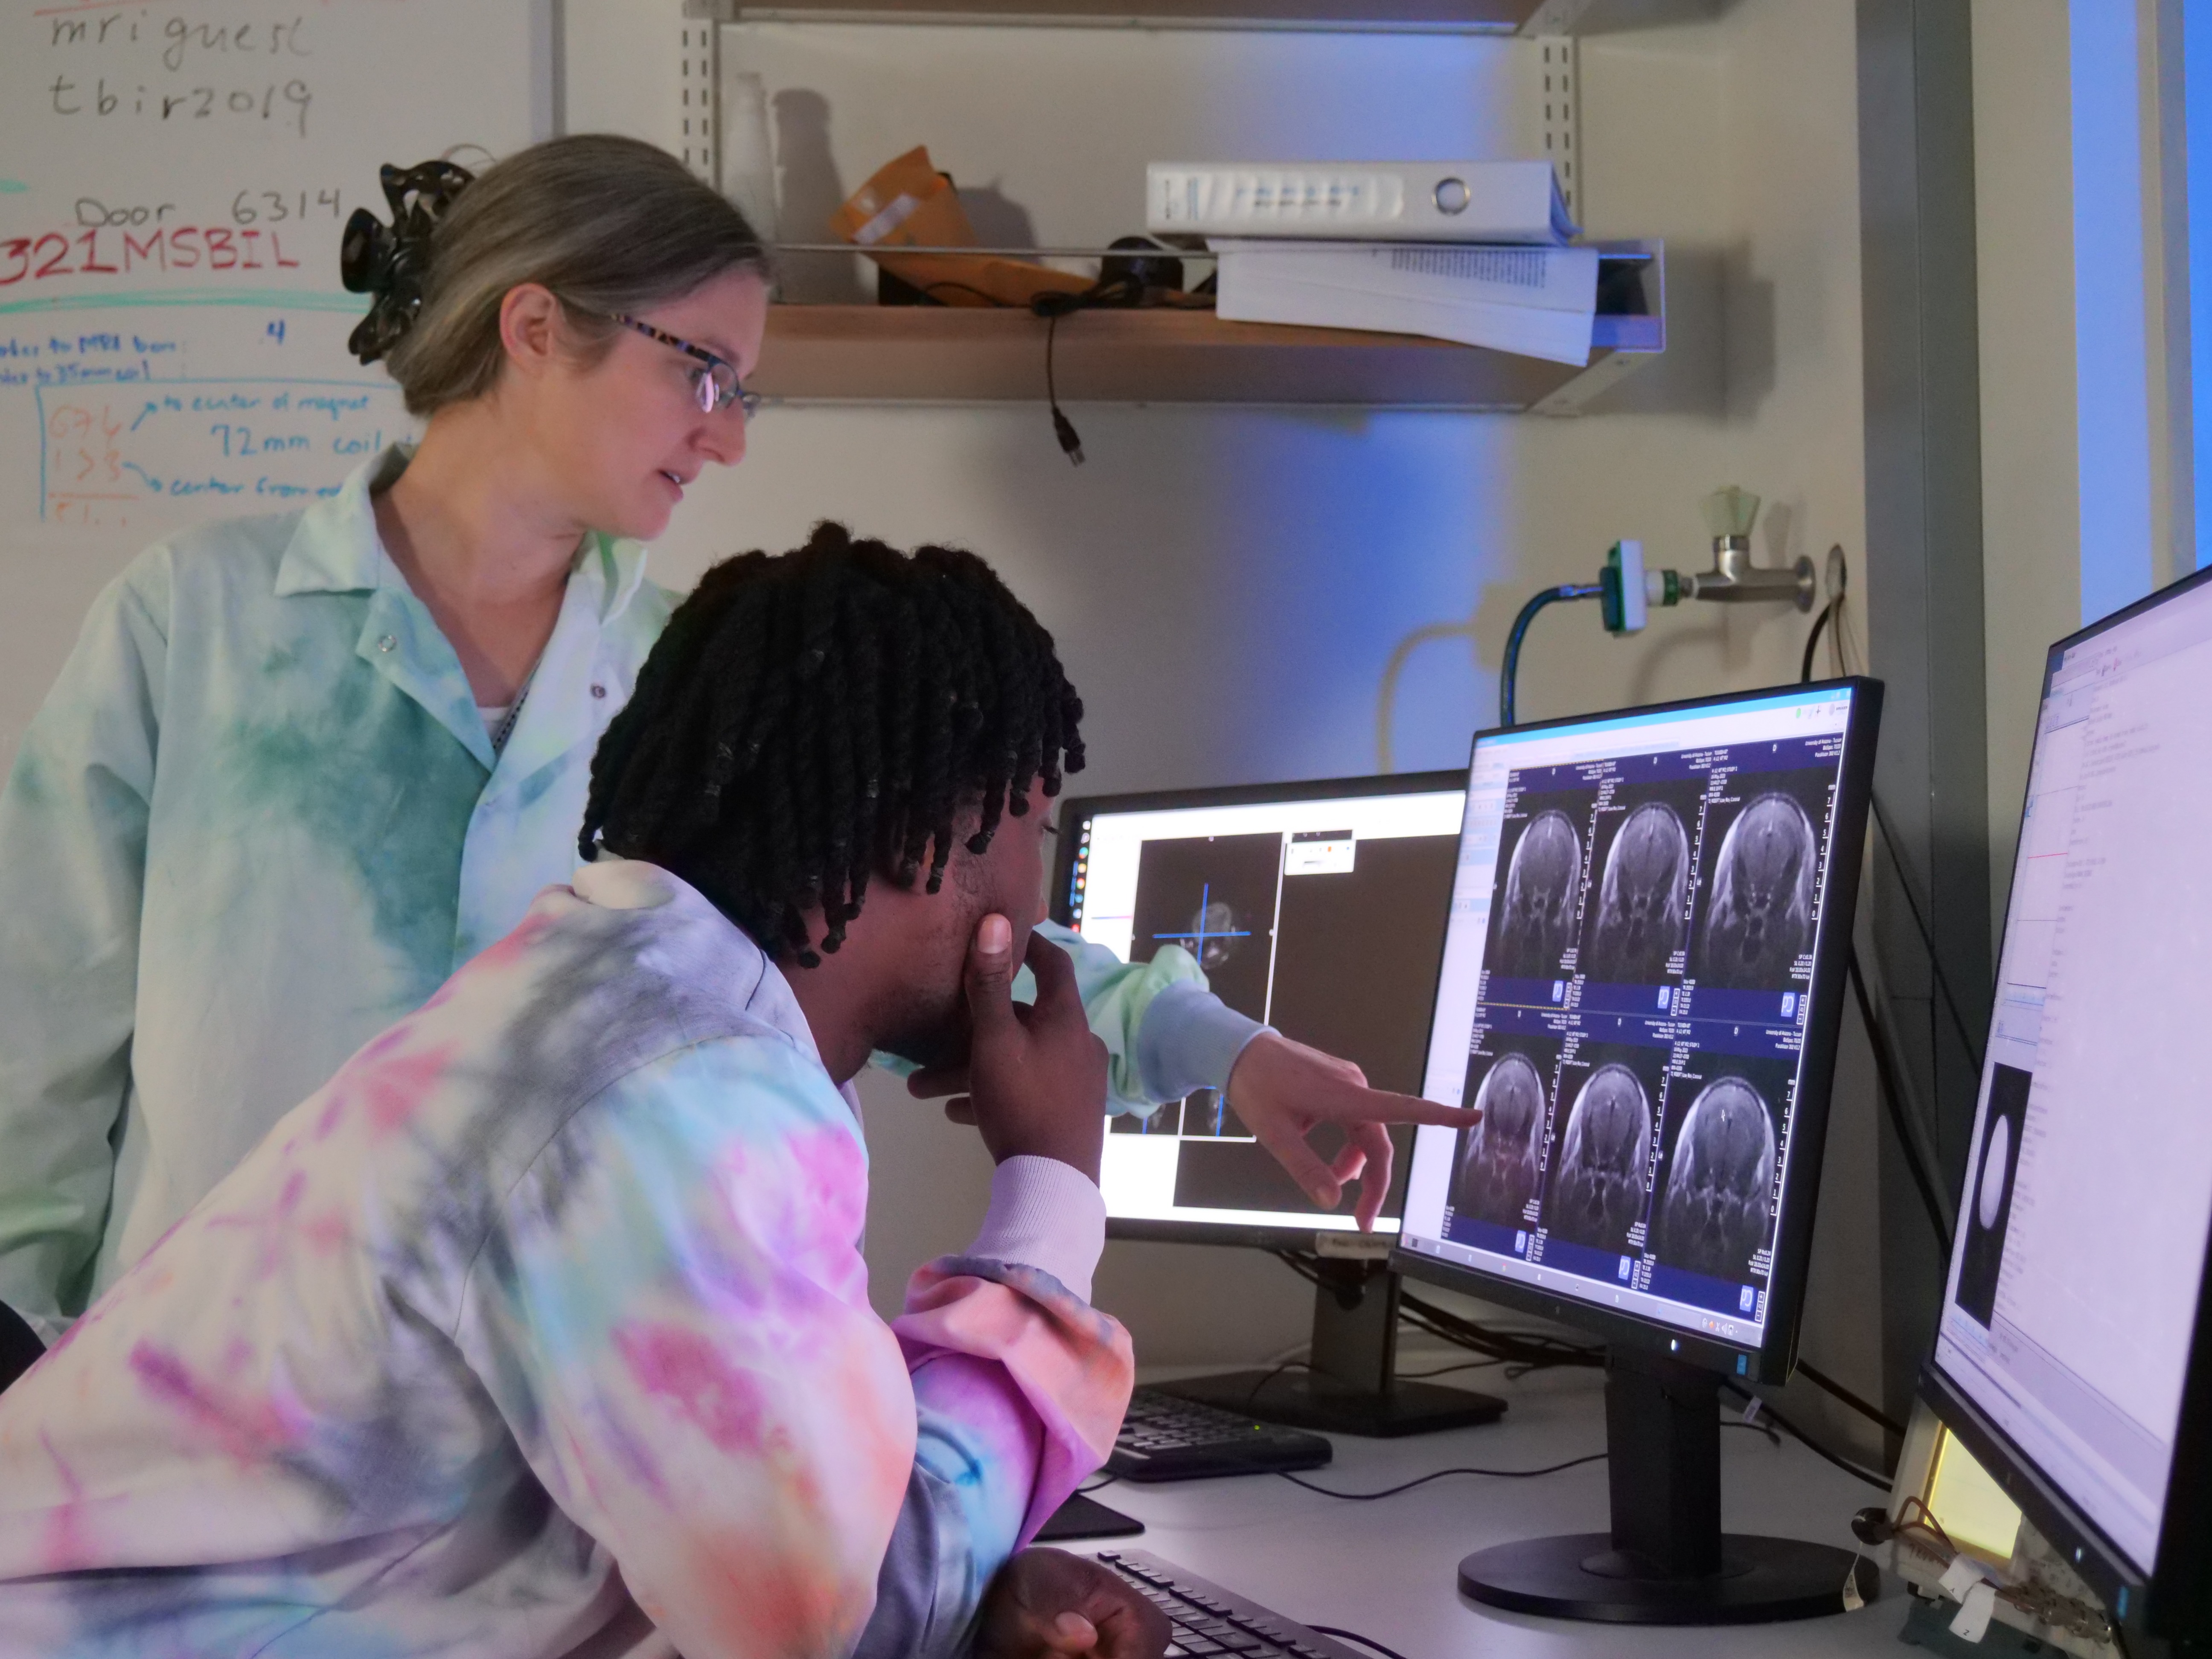 Woman points at a screen with brain scans while a young man looks on curiously